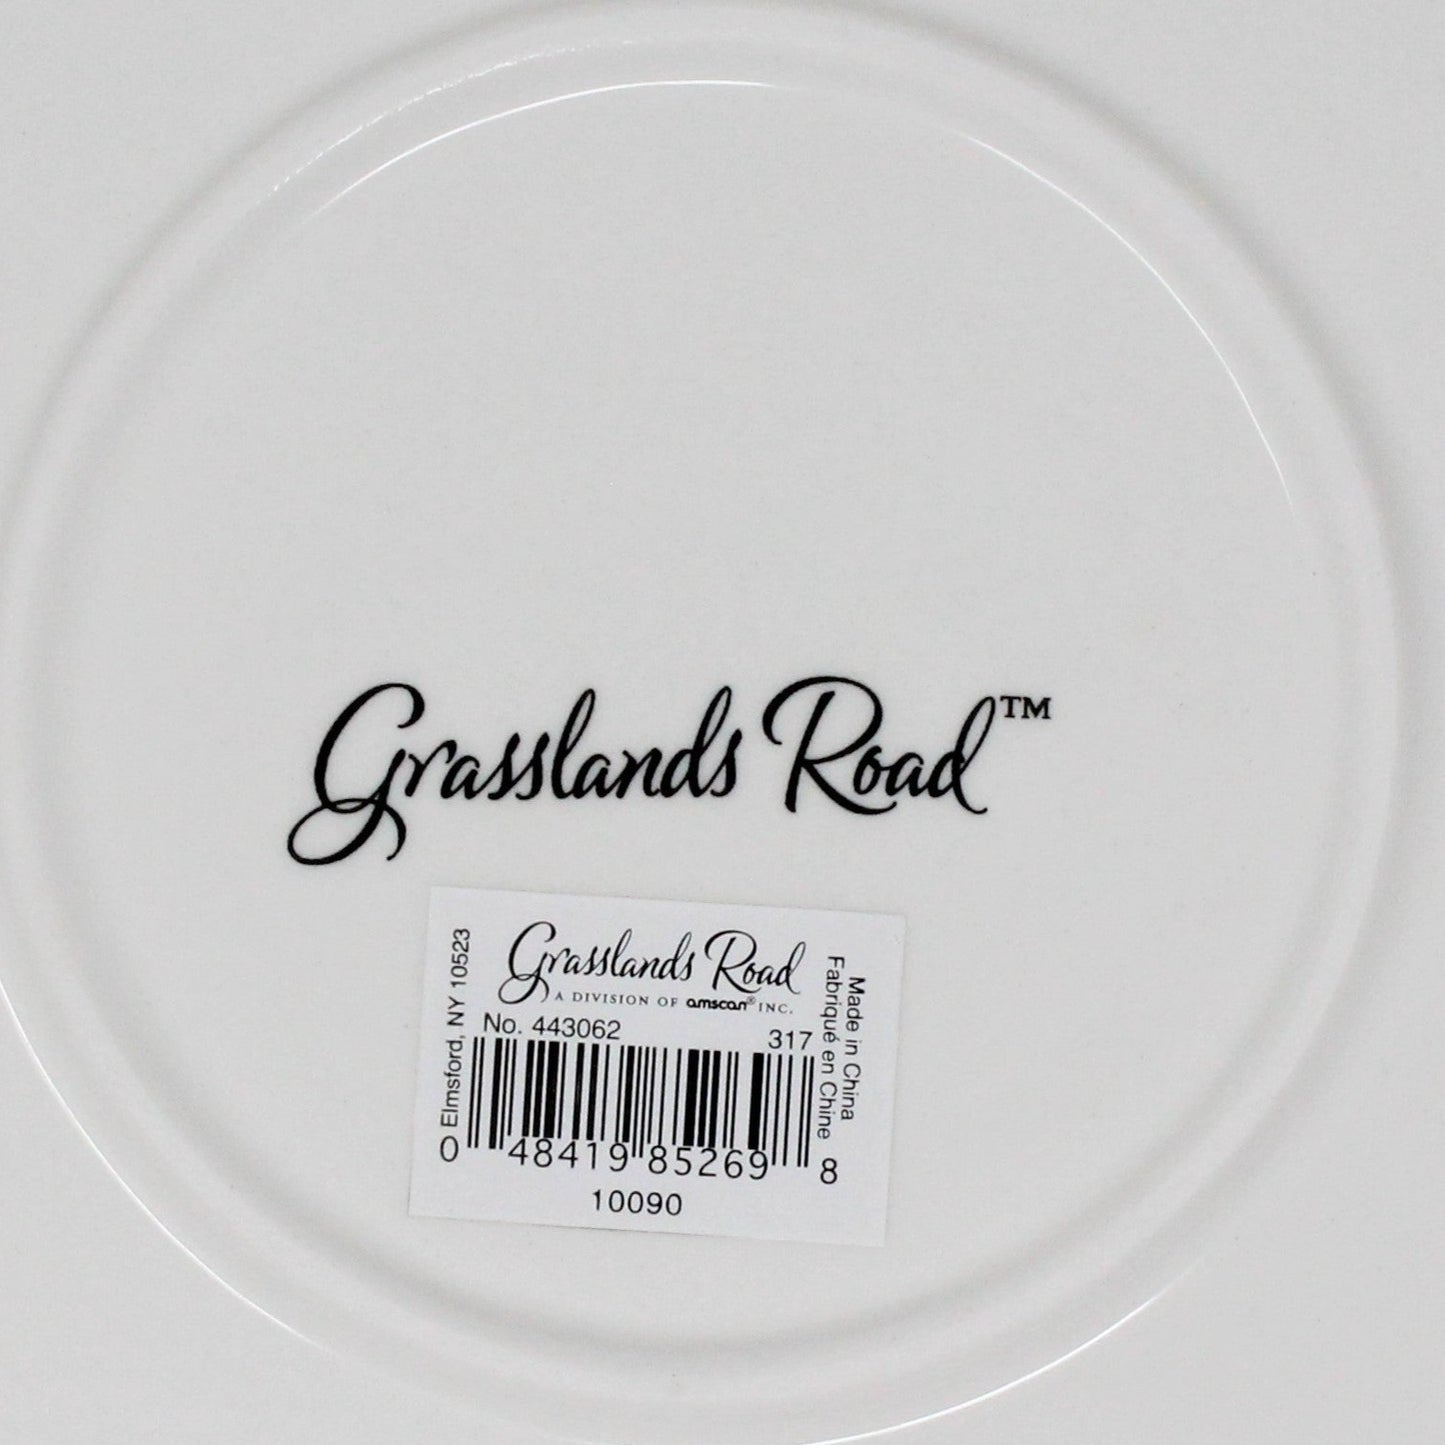 Cake / Cookie Plate - Grasslands Road, Gift of Thanks, 12"